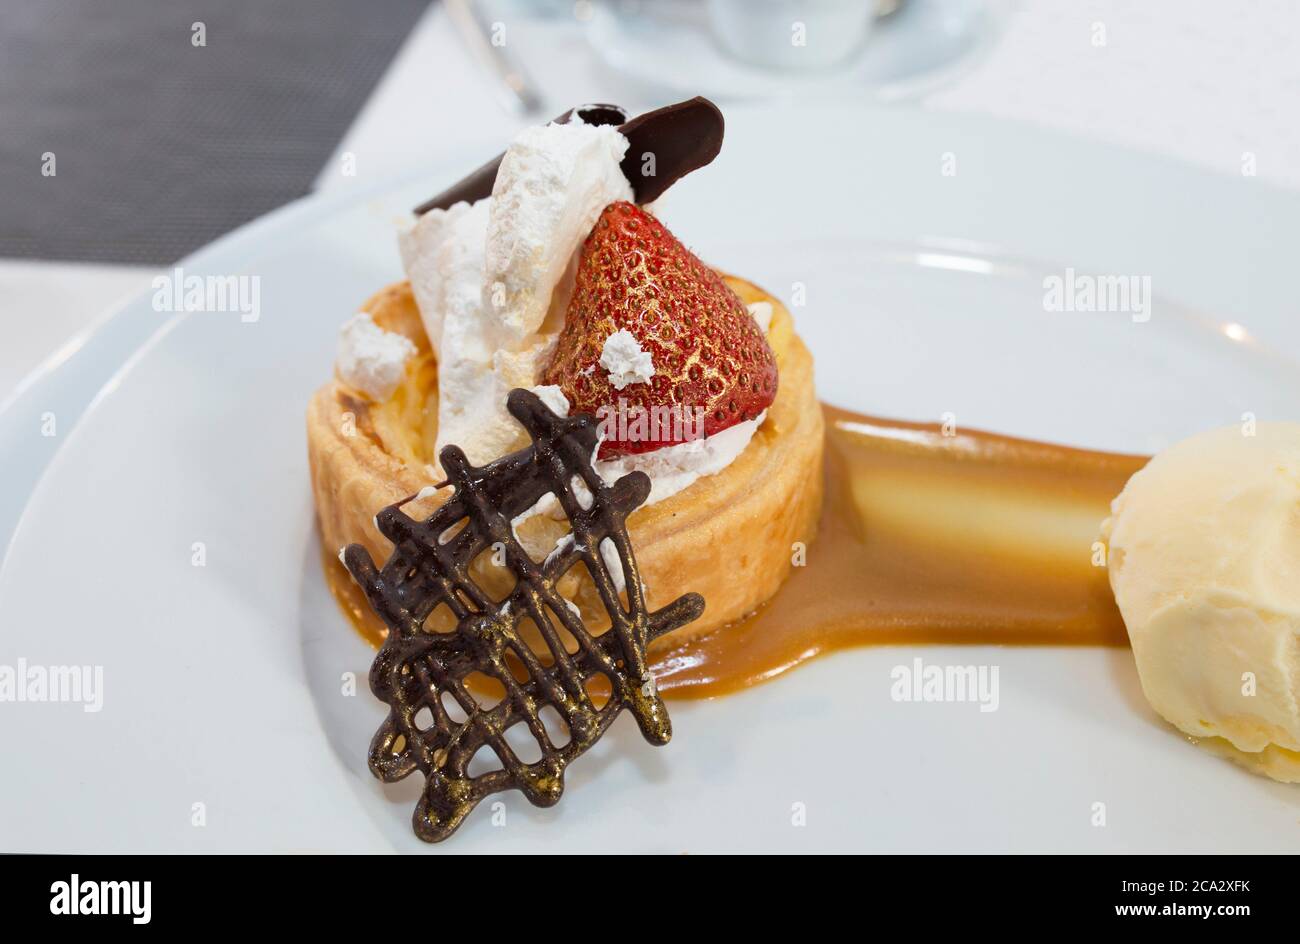 Haute cuisine dessert coated with edible gold dust. Puff pastry filled with creme brulee, raspberry and chocolate tile topped with Madagascar vanilla Stock Photo